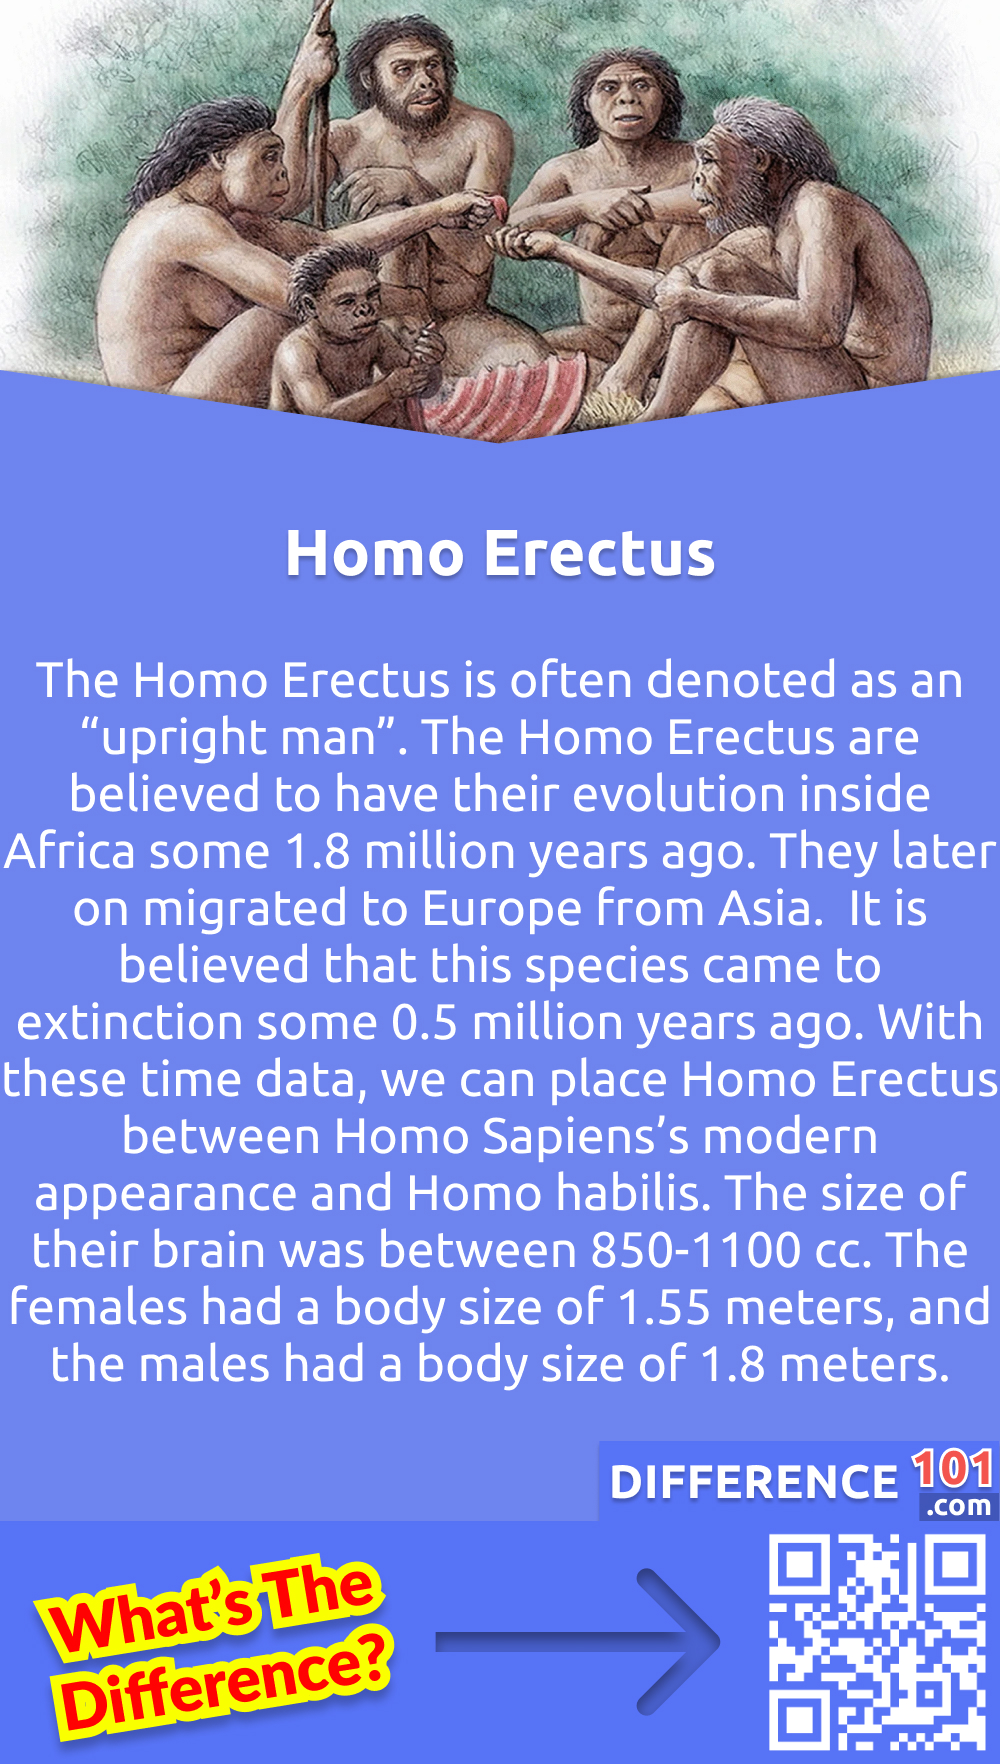 Who is Homo Erectus? The Homo Erectus is often denoted as an “upright man”. The Homo Erectus are believed to have their evolution inside Africa some 1.8 million years ago. They later on migrated to Europe from Asia.  It is believed that this species came to extinction some 0.5 million years ago. With these time data, we can place Homo Erectus between Homo Sapiens’s modern appearance and Homo habilis. The size of their brain was between 850-1100 cc. The females had a body size of 1.55 meters, and the males had a body size of 1.8 meters.